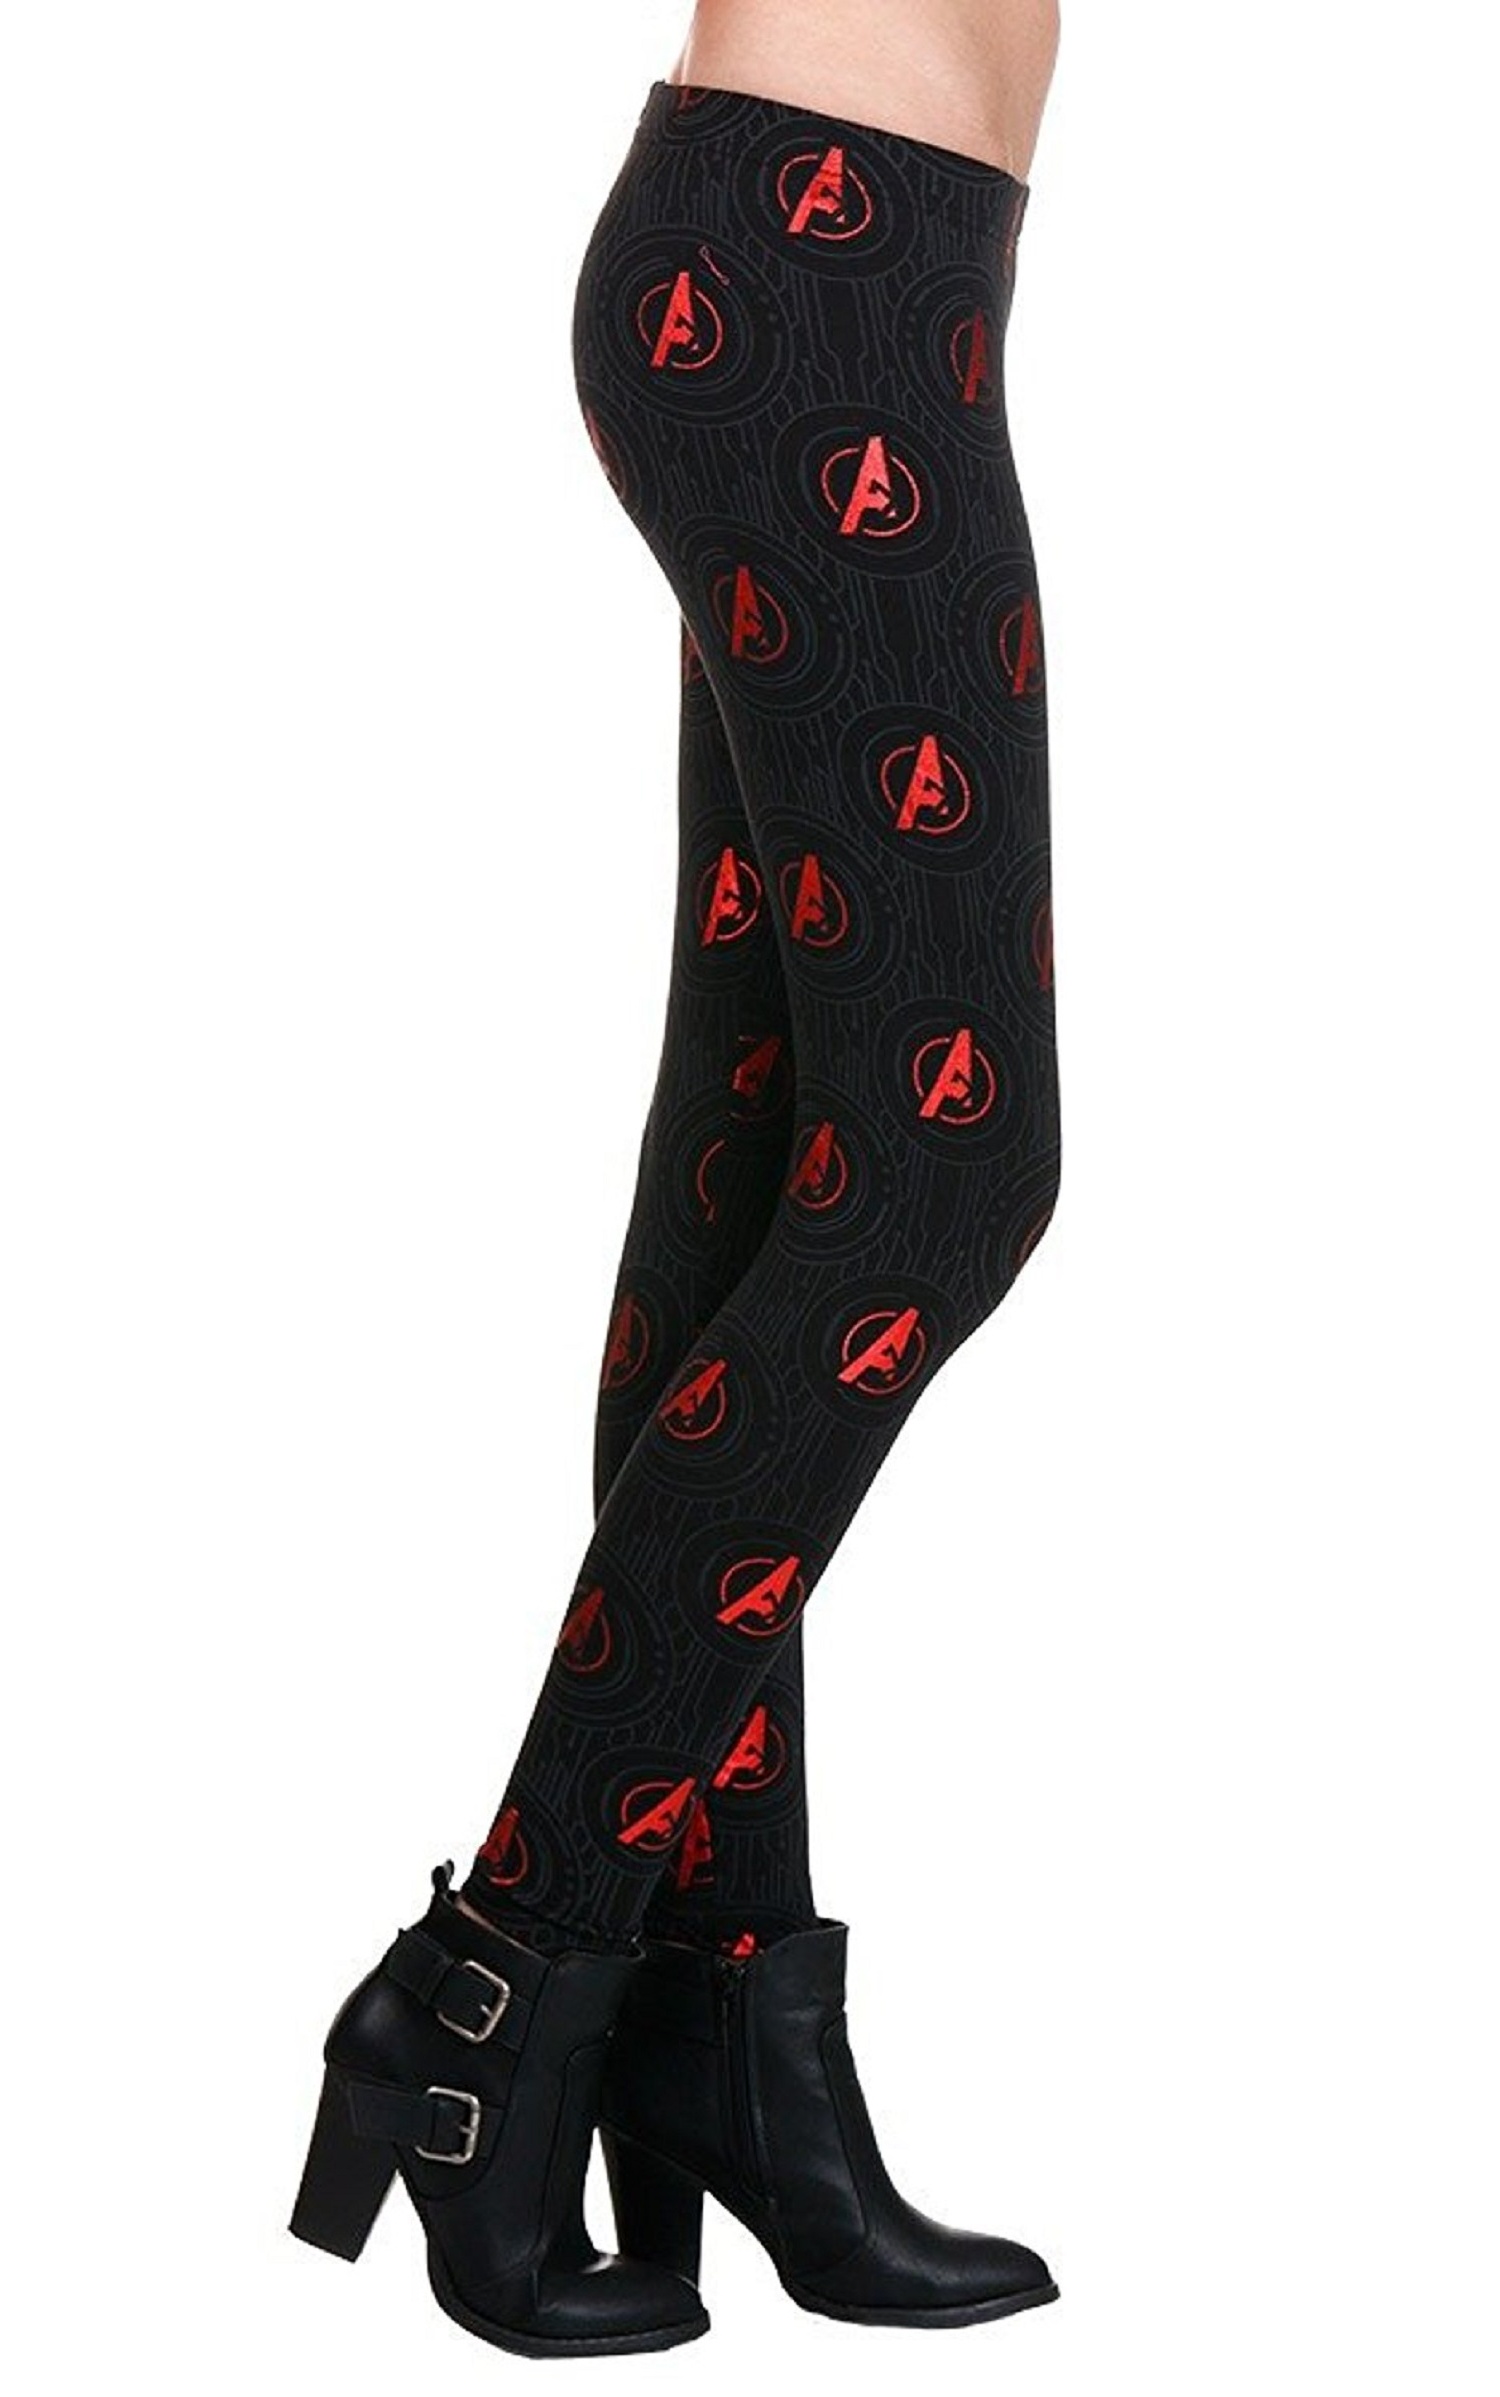 Officially Licensed Marvel Avengers Age of Ultron Symbol Ankle-Length Teen Juniors Leggings (Size Large) - image 2 of 4